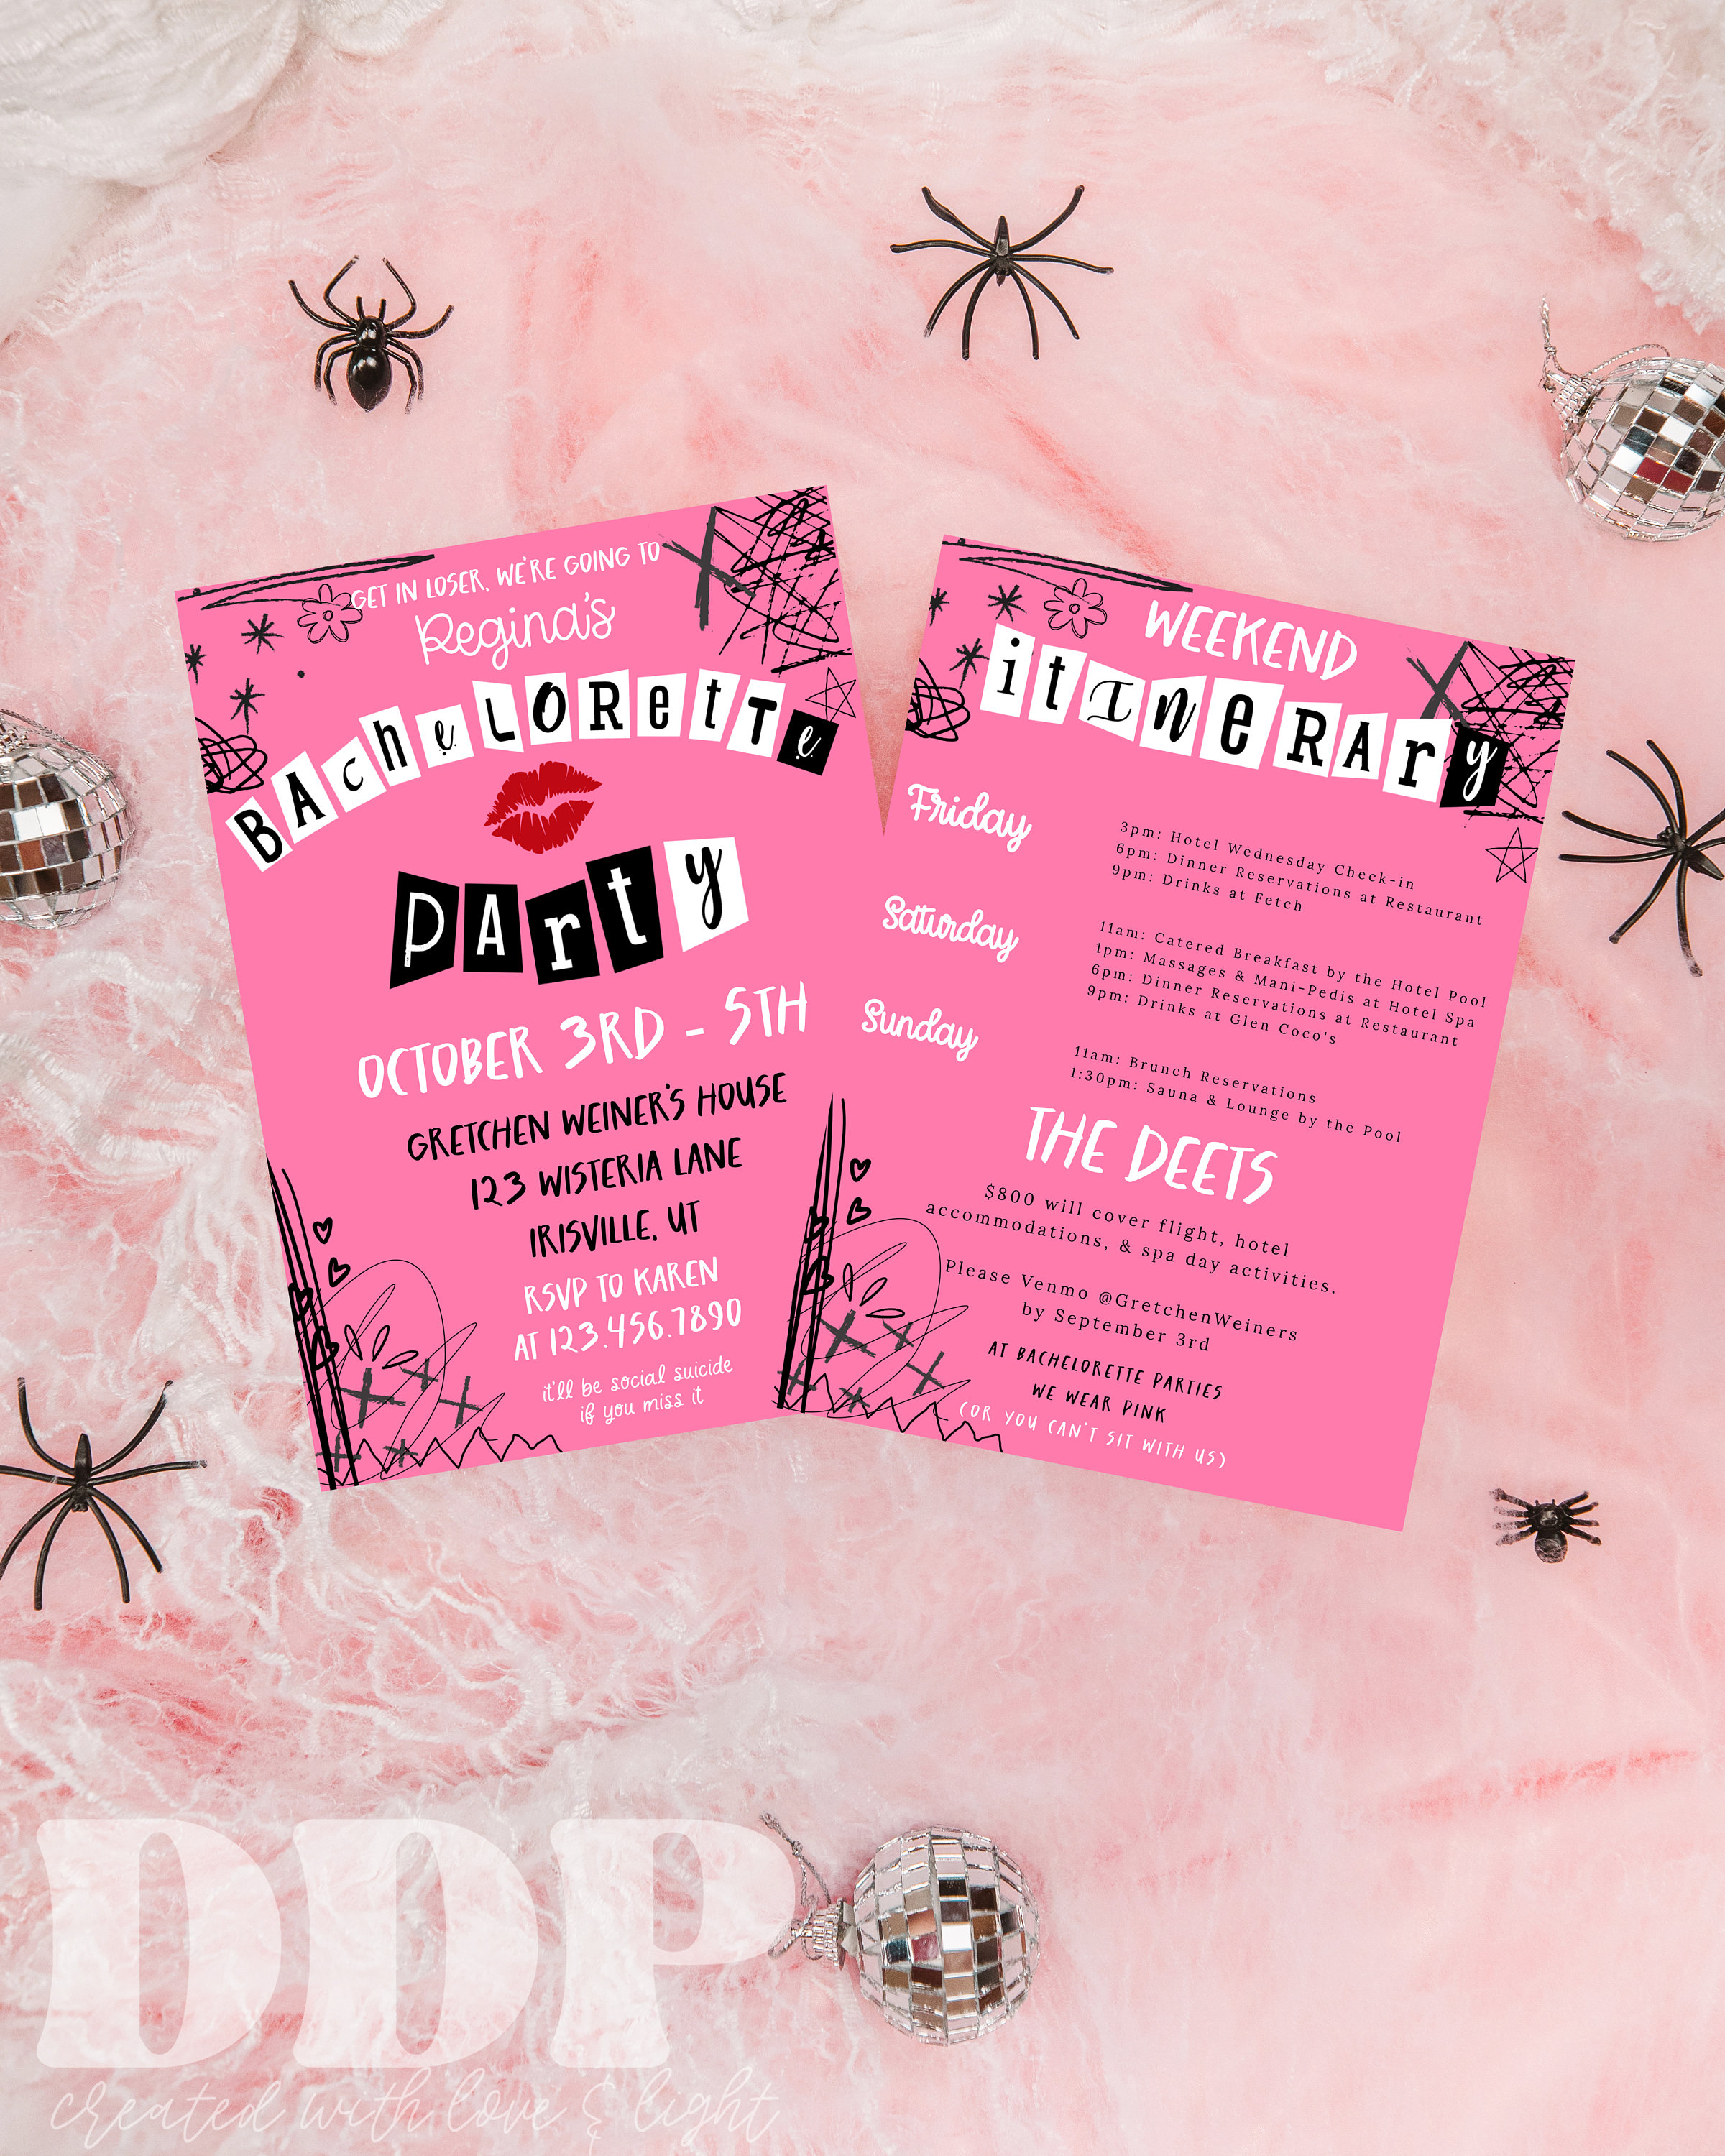 Mean Girls Bachelorette Party Invitations, Mean Girls Invitation, Mean  Girls Bachelorette Party Theme, Mean Girls Bachelorette Invites, DIY